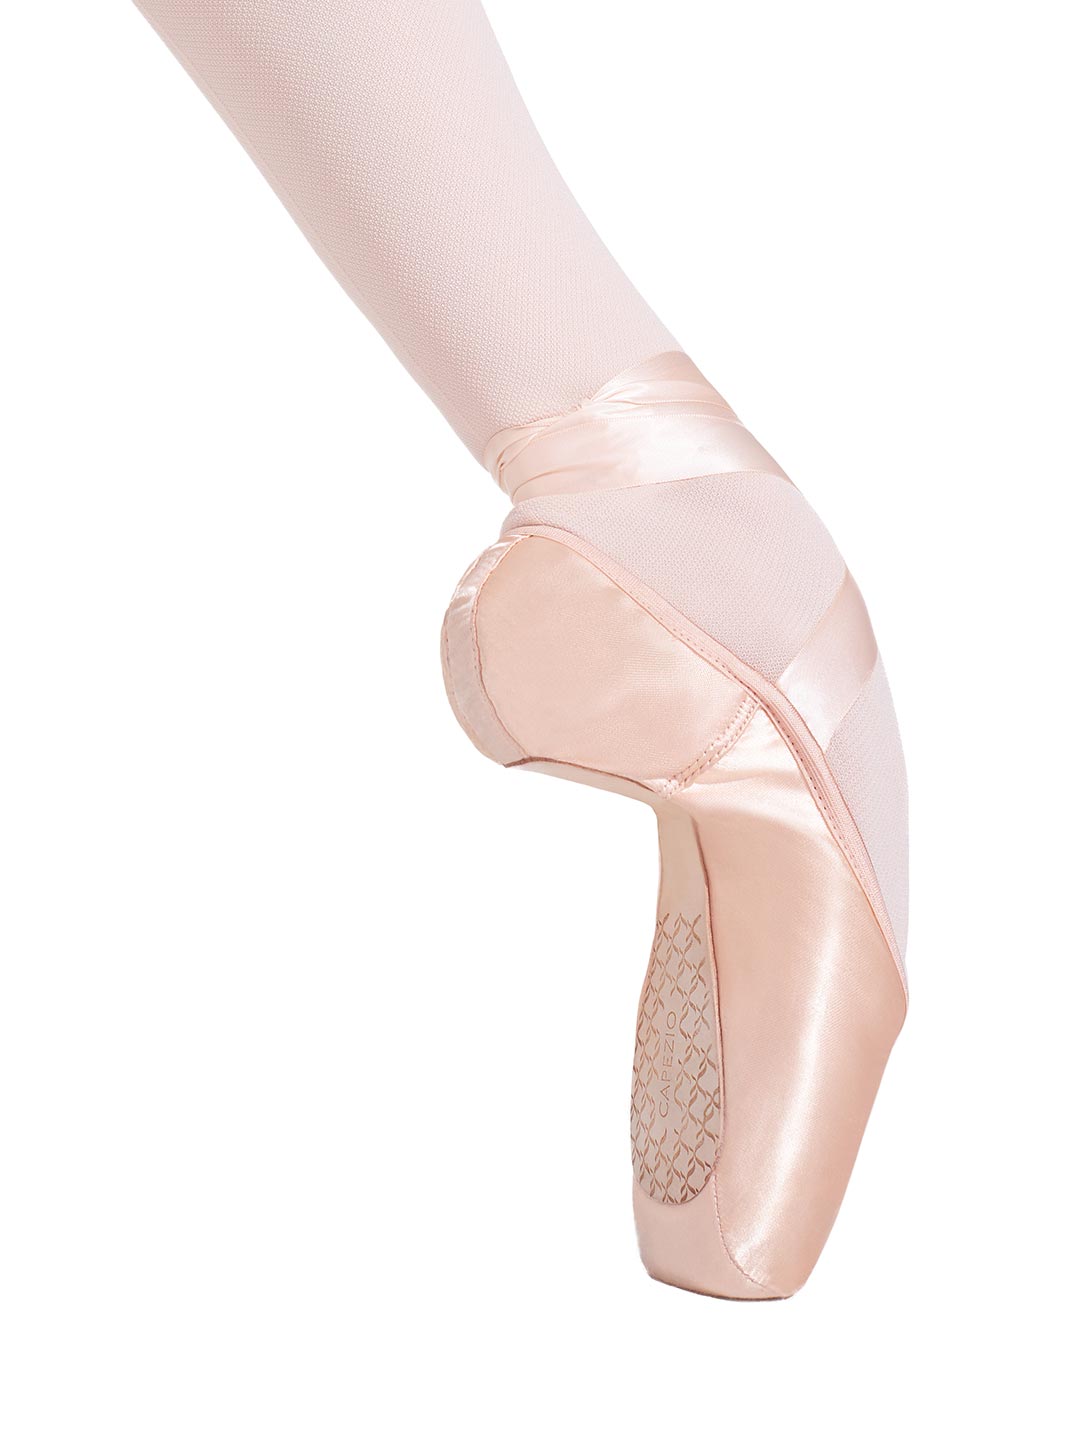 Cambré - 1128W Pointe Shoe with #4 Shank and Broad Toe Box